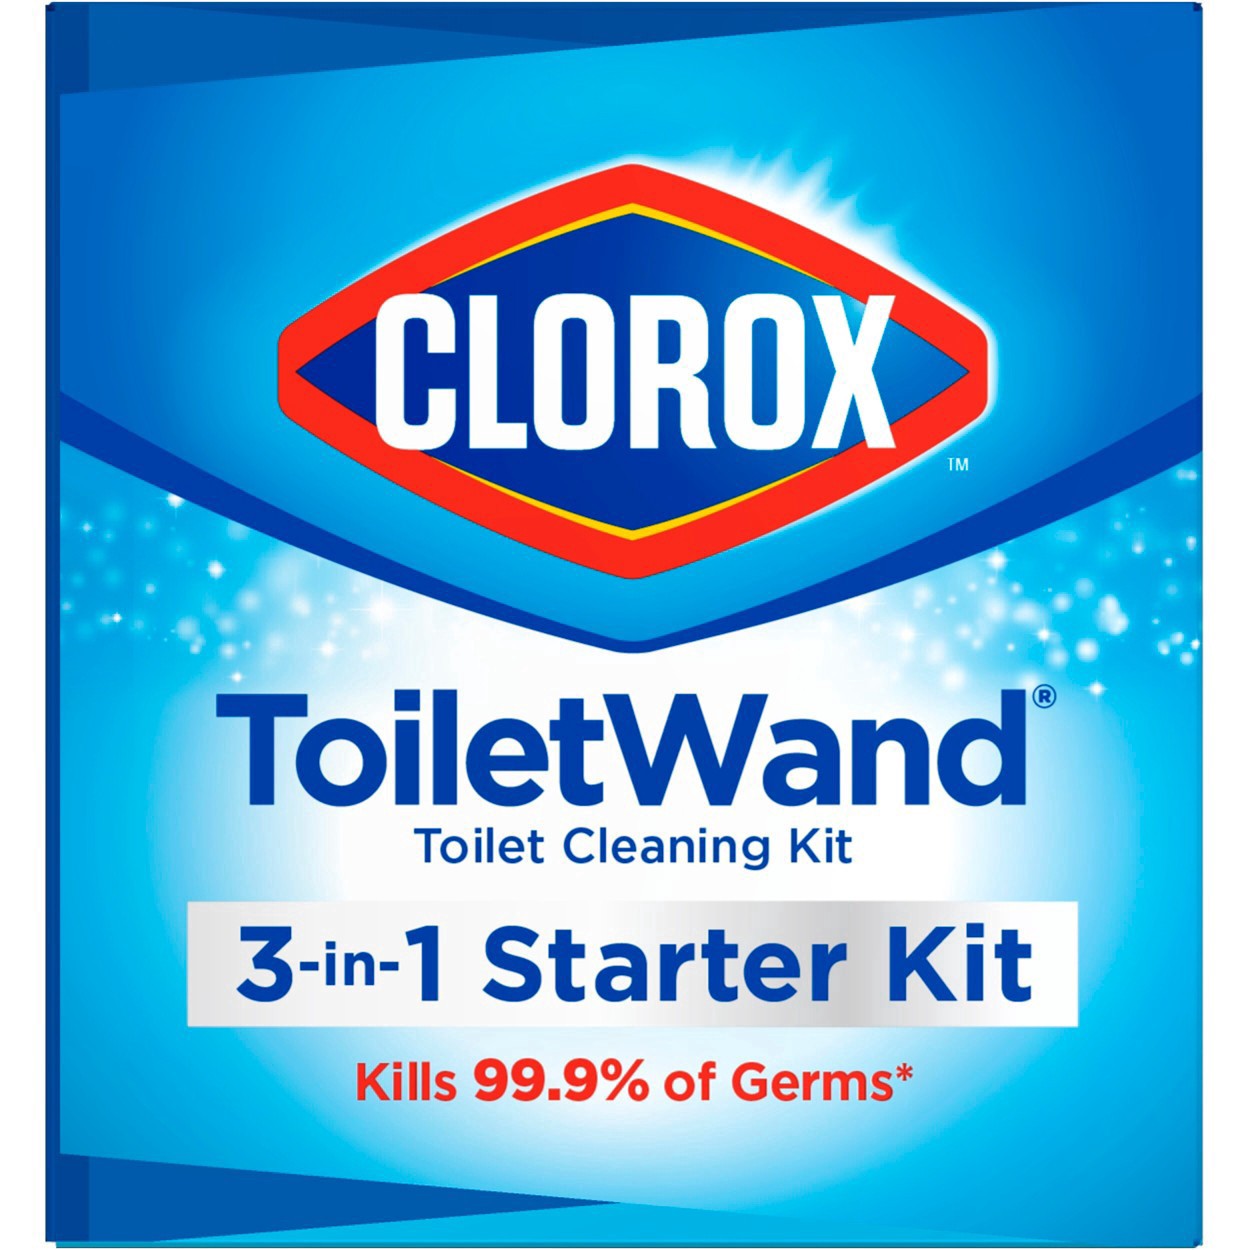 slide 23 of 176, Clorox Toilet Wand 3-in-1 Starter Toliet Cleaning Kit, 1 ct